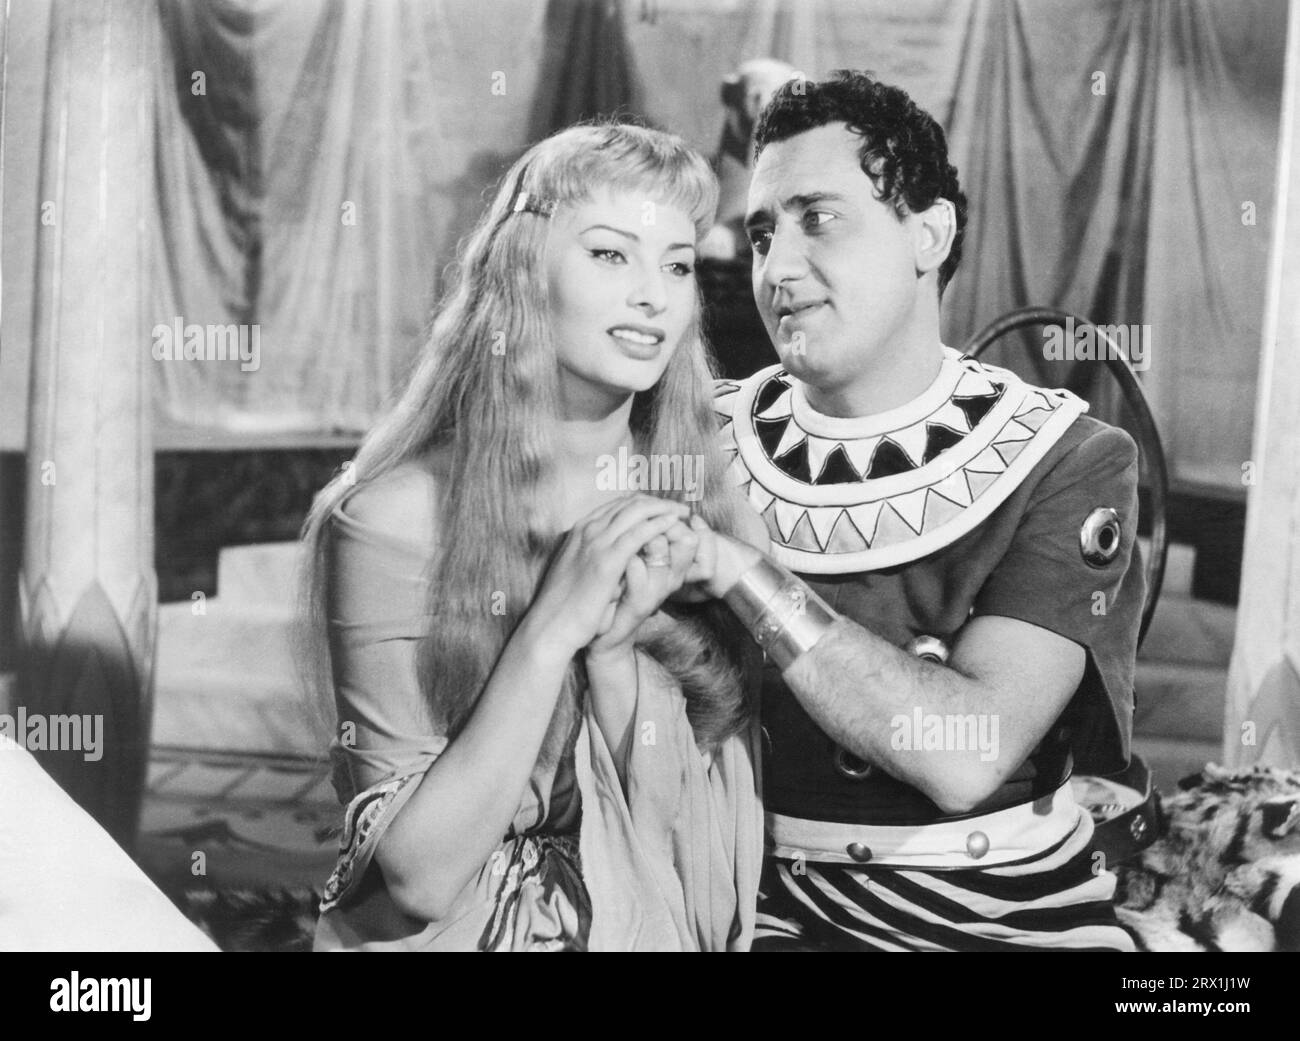 SOPHIA LOREN and ALBERTO SORDI in TWO NIGHTS WITH CLEOPATRA (1953) -Original title: DUE NOTTI CON CLEOPATRA-, directed by MARIO MATTOLI. Credit: EXCELSA FILM / Album Stock Photo